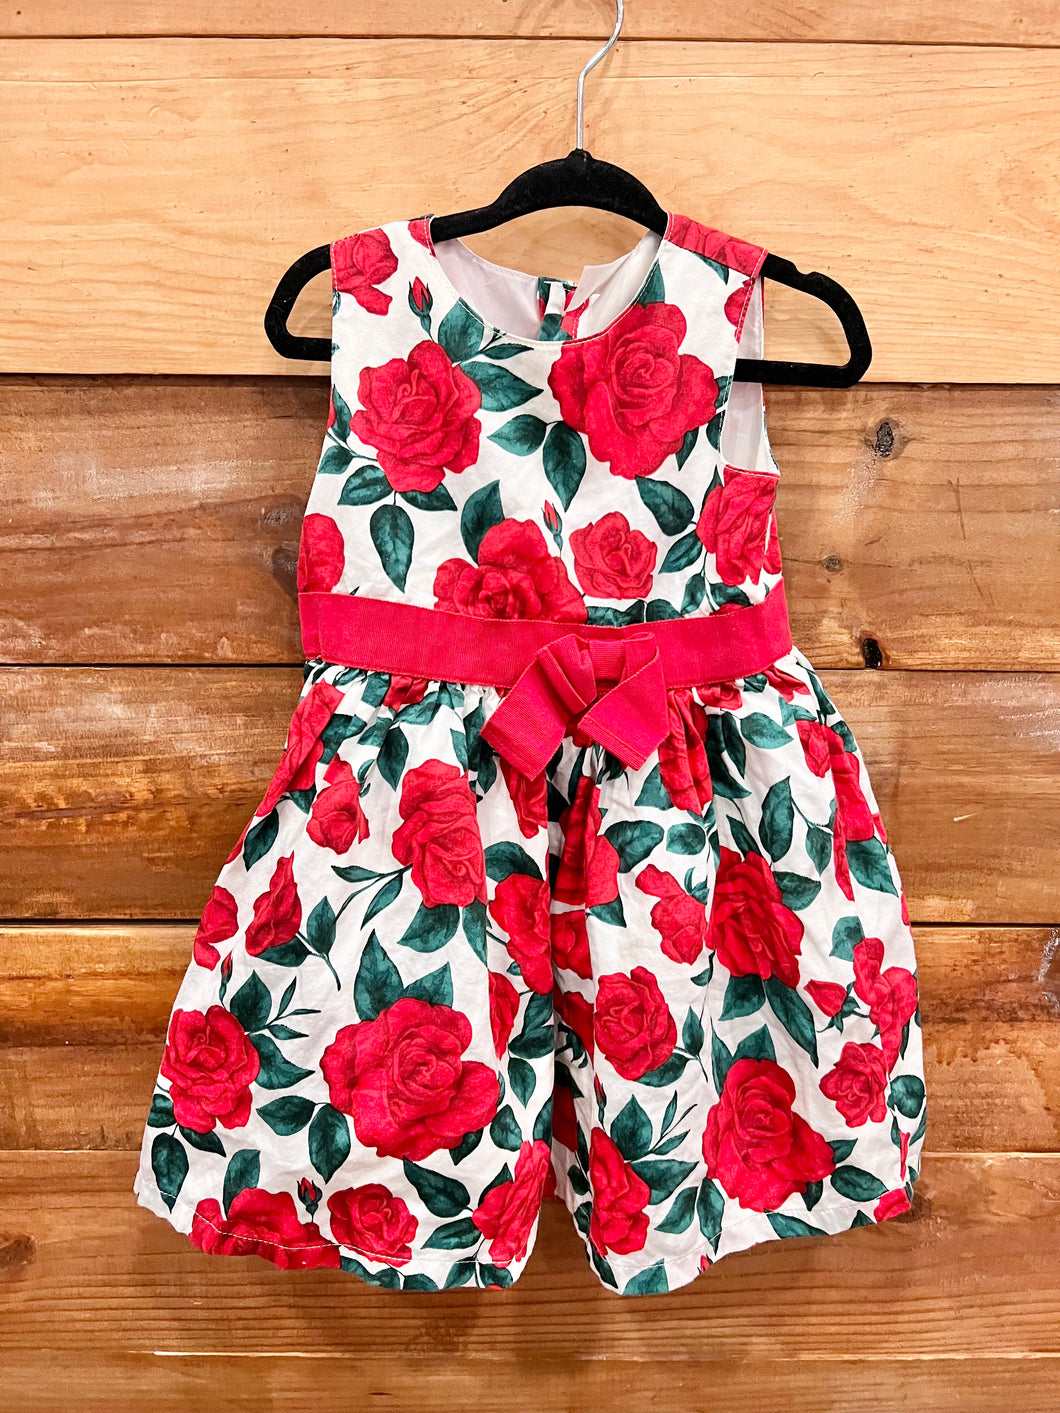 Carters Roses Dress Size 18m